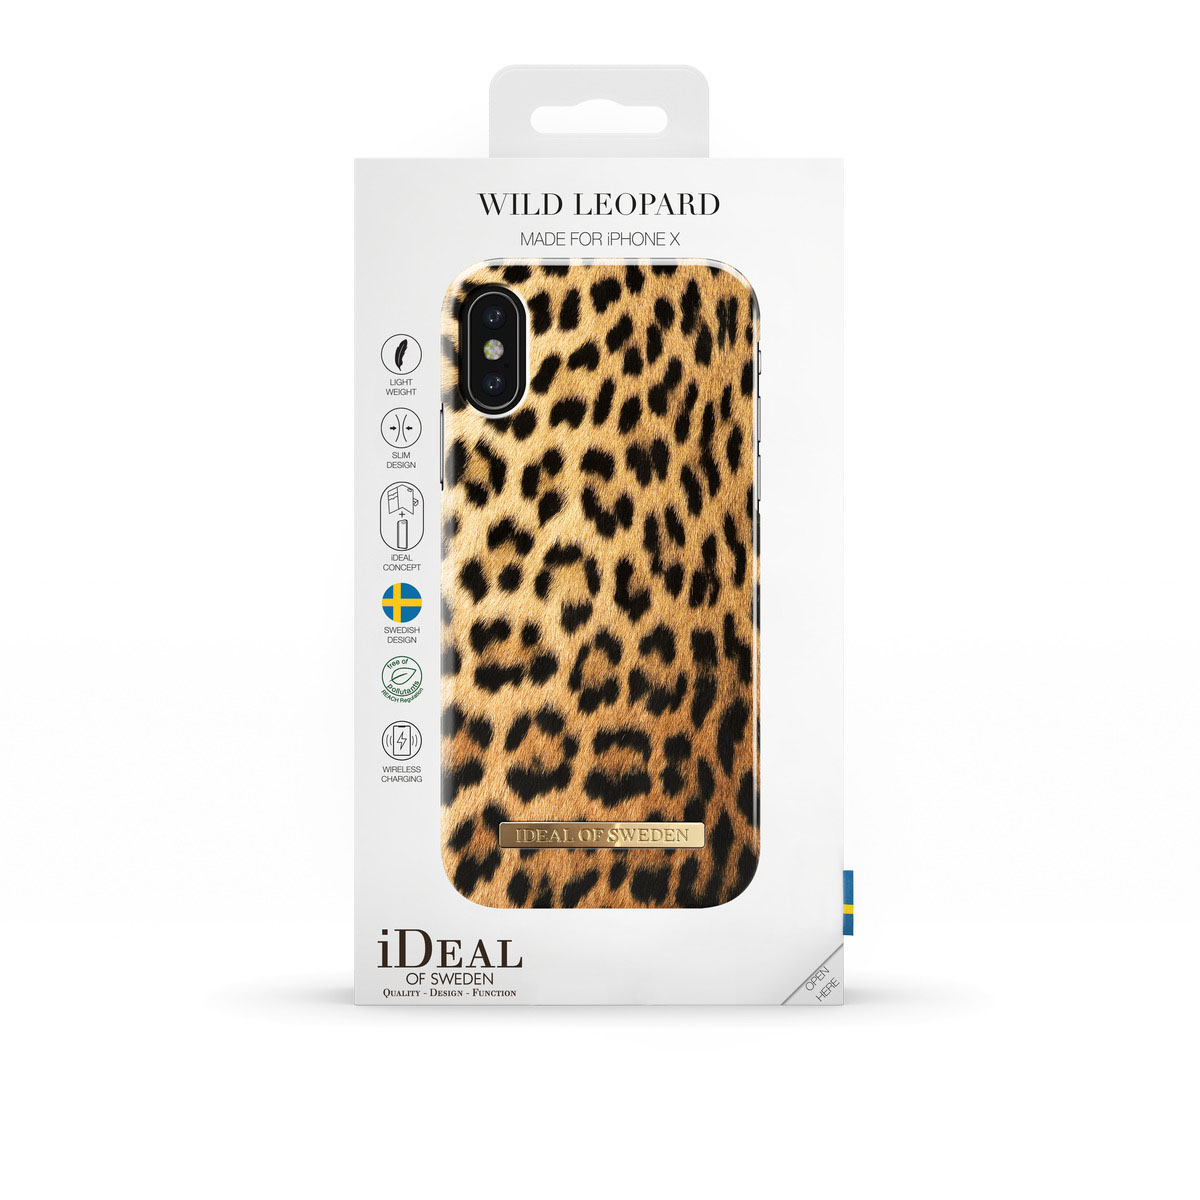 iPhone Apple, OF Fashion, Leopard IDEAL Backcover, SWEDEN X, Wild